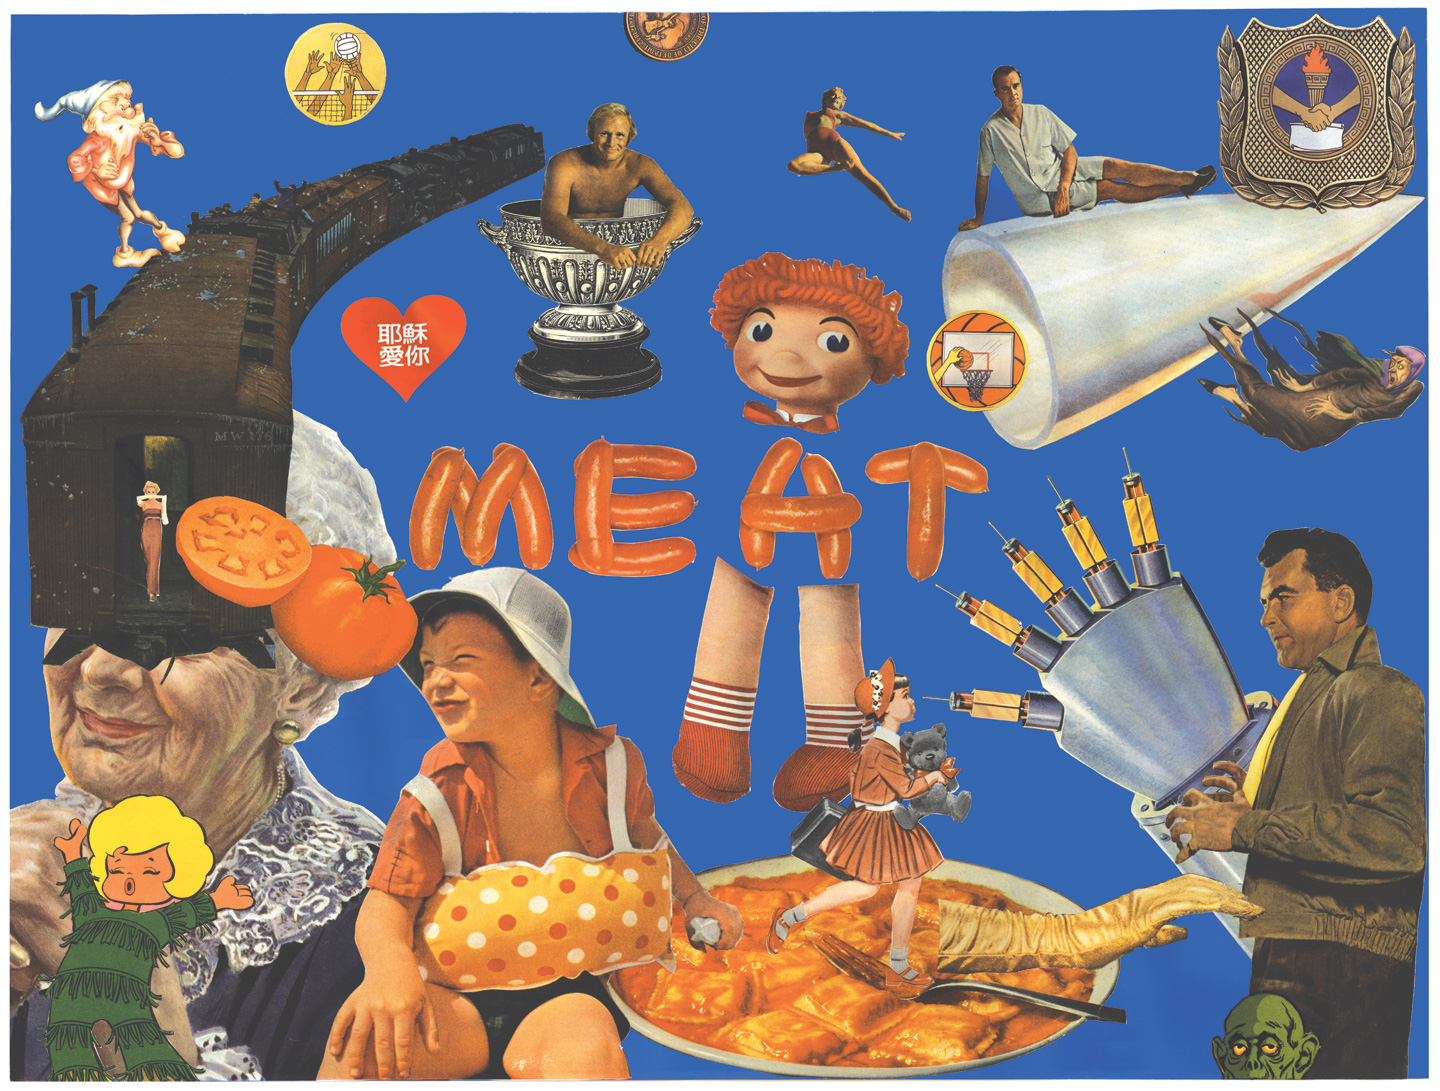 MEAT (2010)